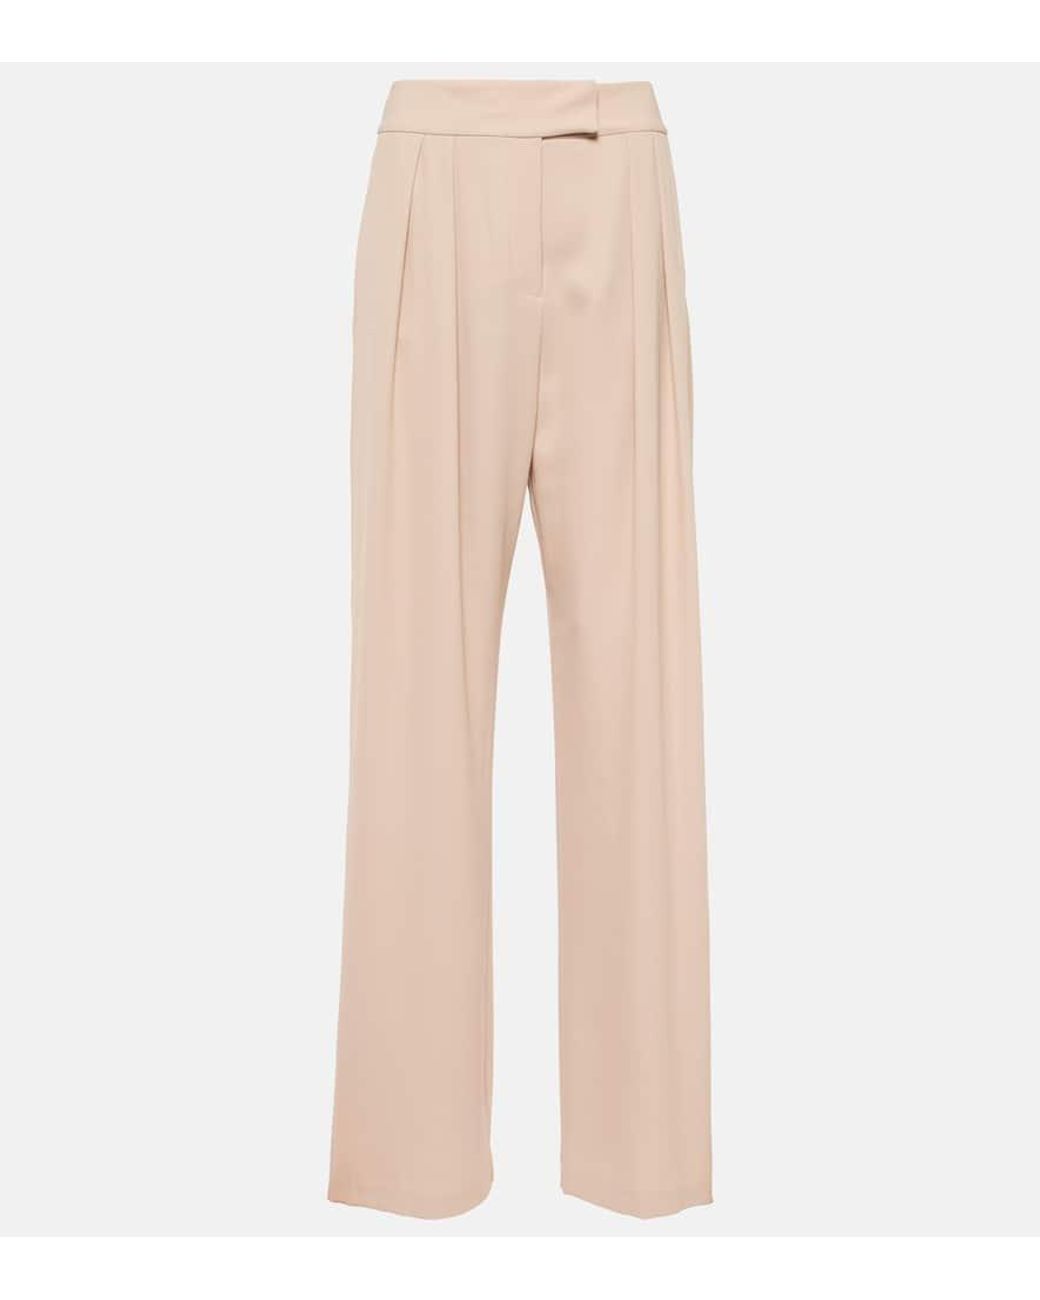 The Sei High-rise Crepe Pants in Natural